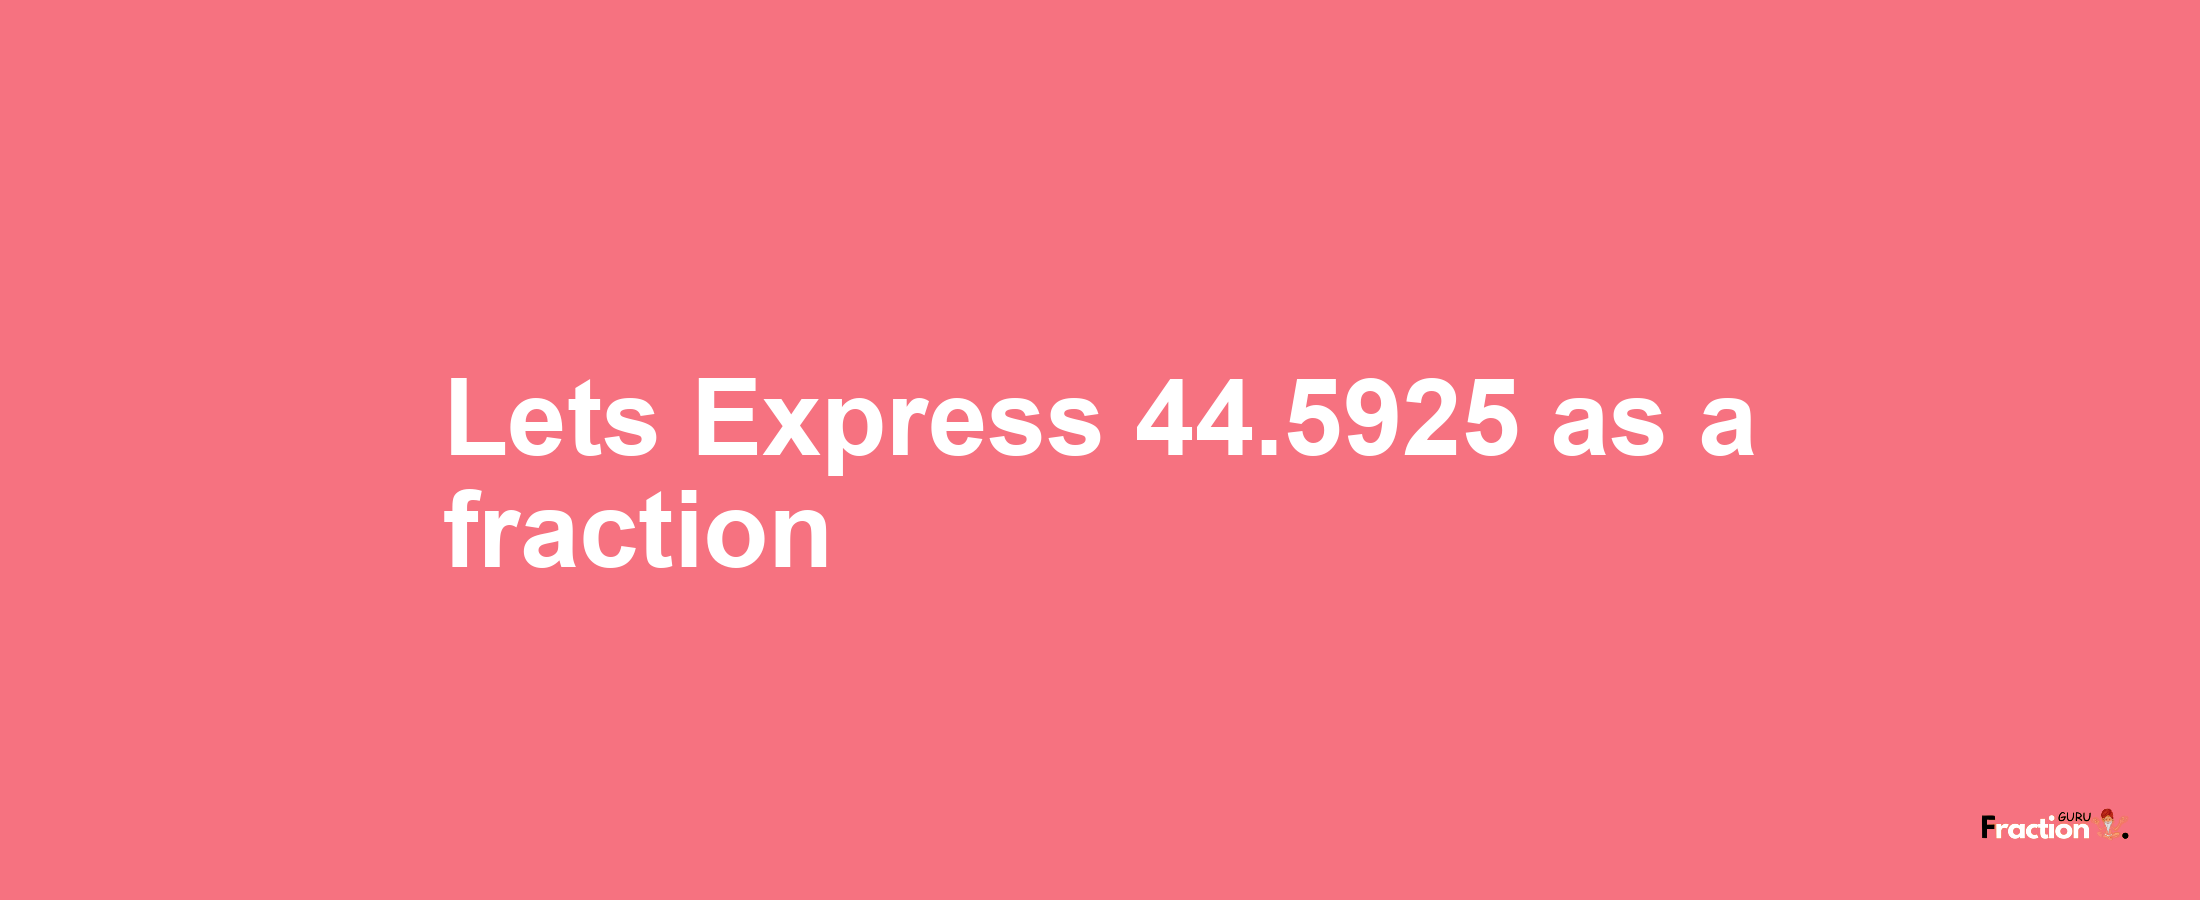 Lets Express 44.5925 as afraction